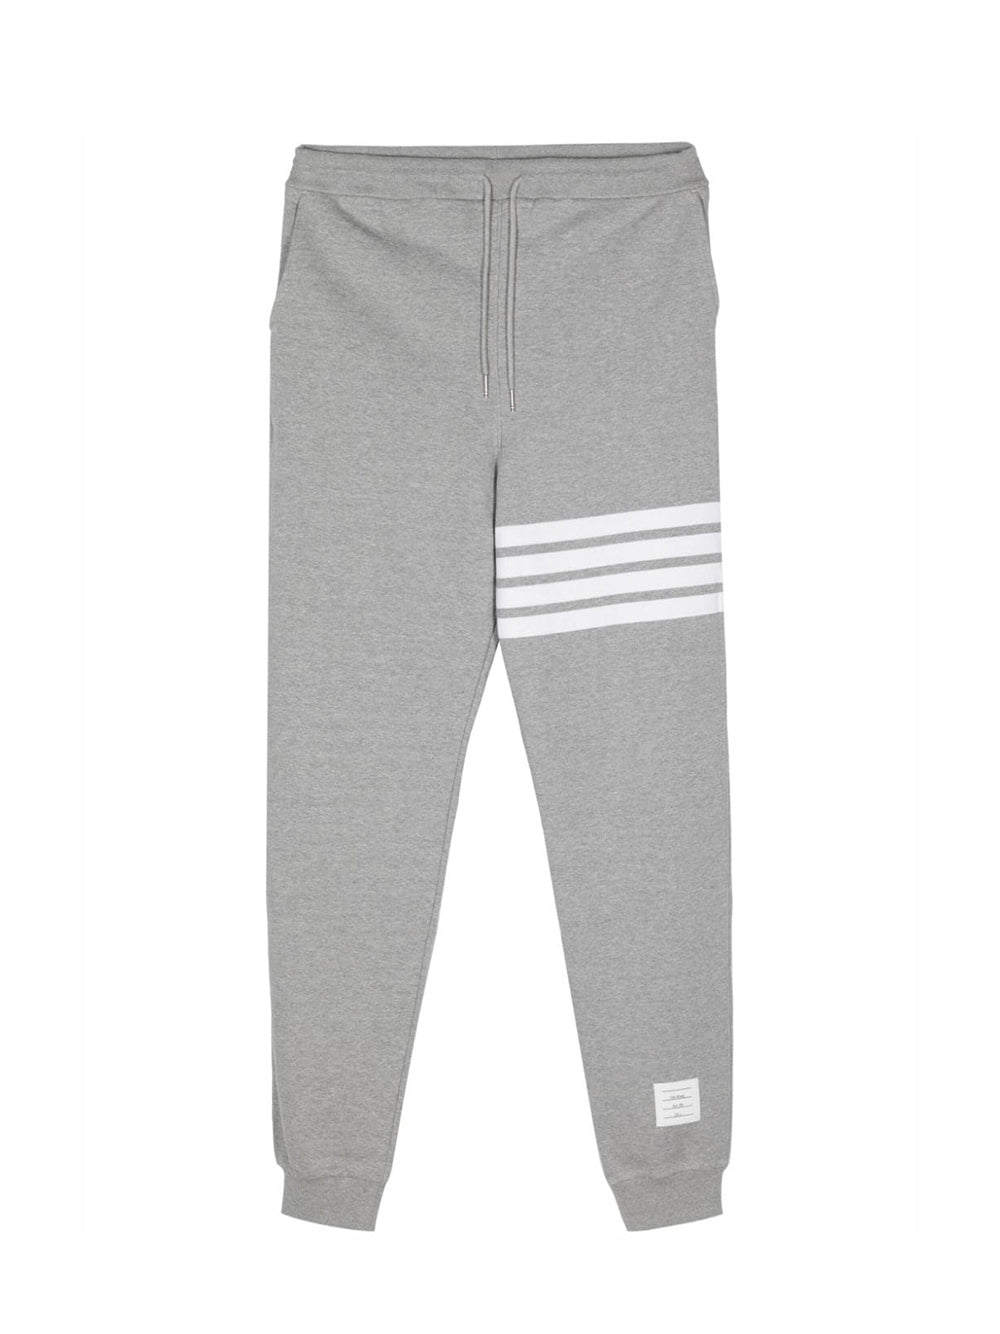 Classic Sweatpant With Engineered 4-Bar In Classic Loop Back W/ Engineered 4 Bar (Light Grey)